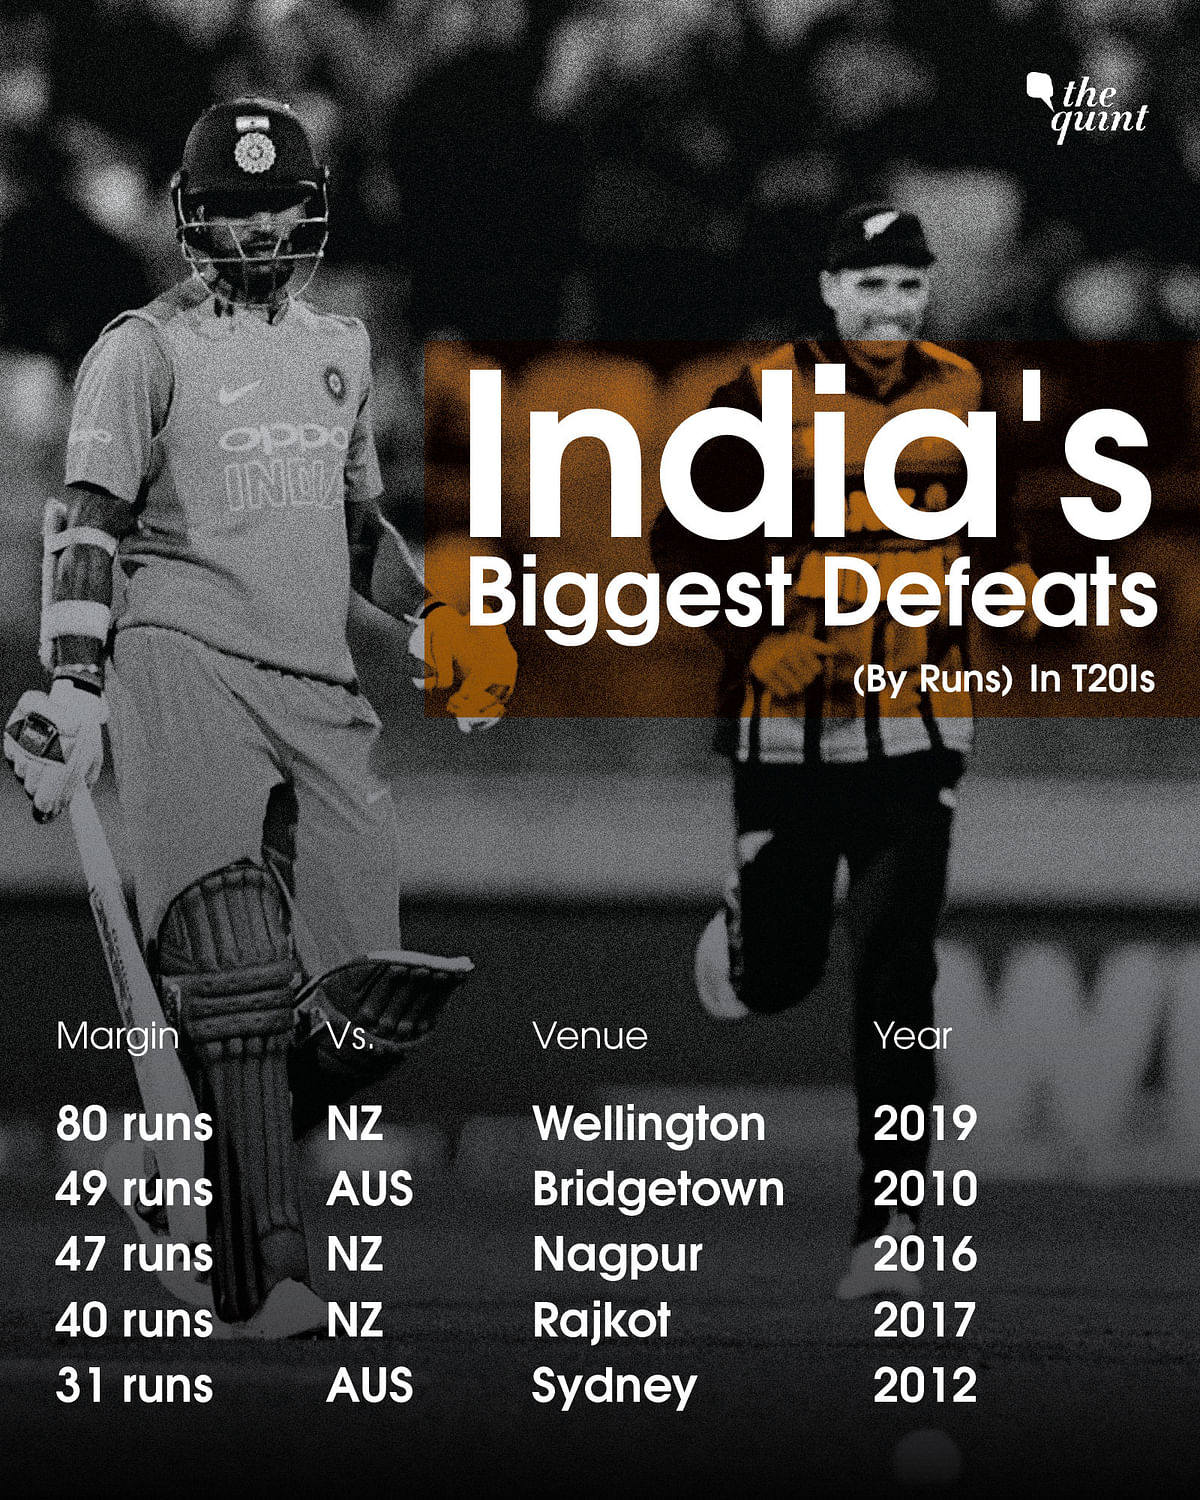 Some unwanted numbers for India’s otherwise proud record after a comprehensive defeat in the 1st T20I at Wellington.